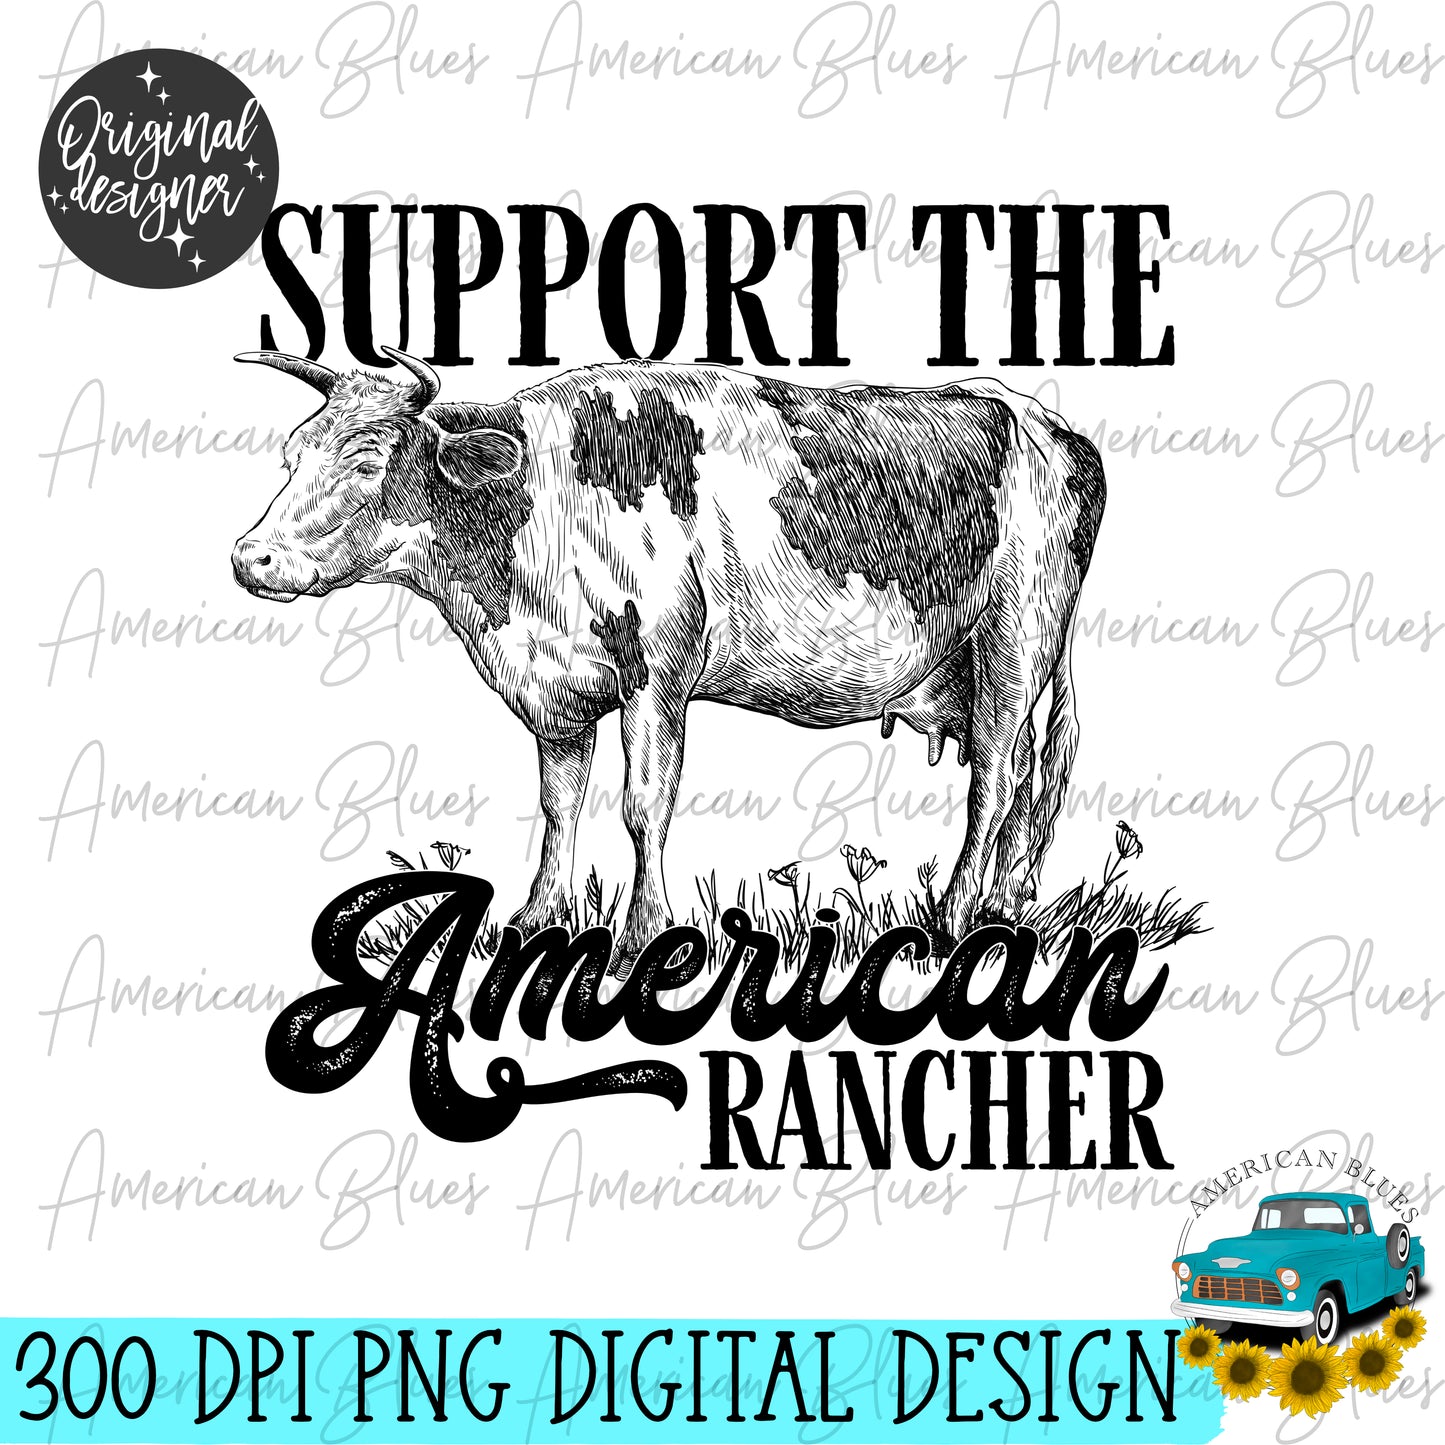 Support the American Rancher